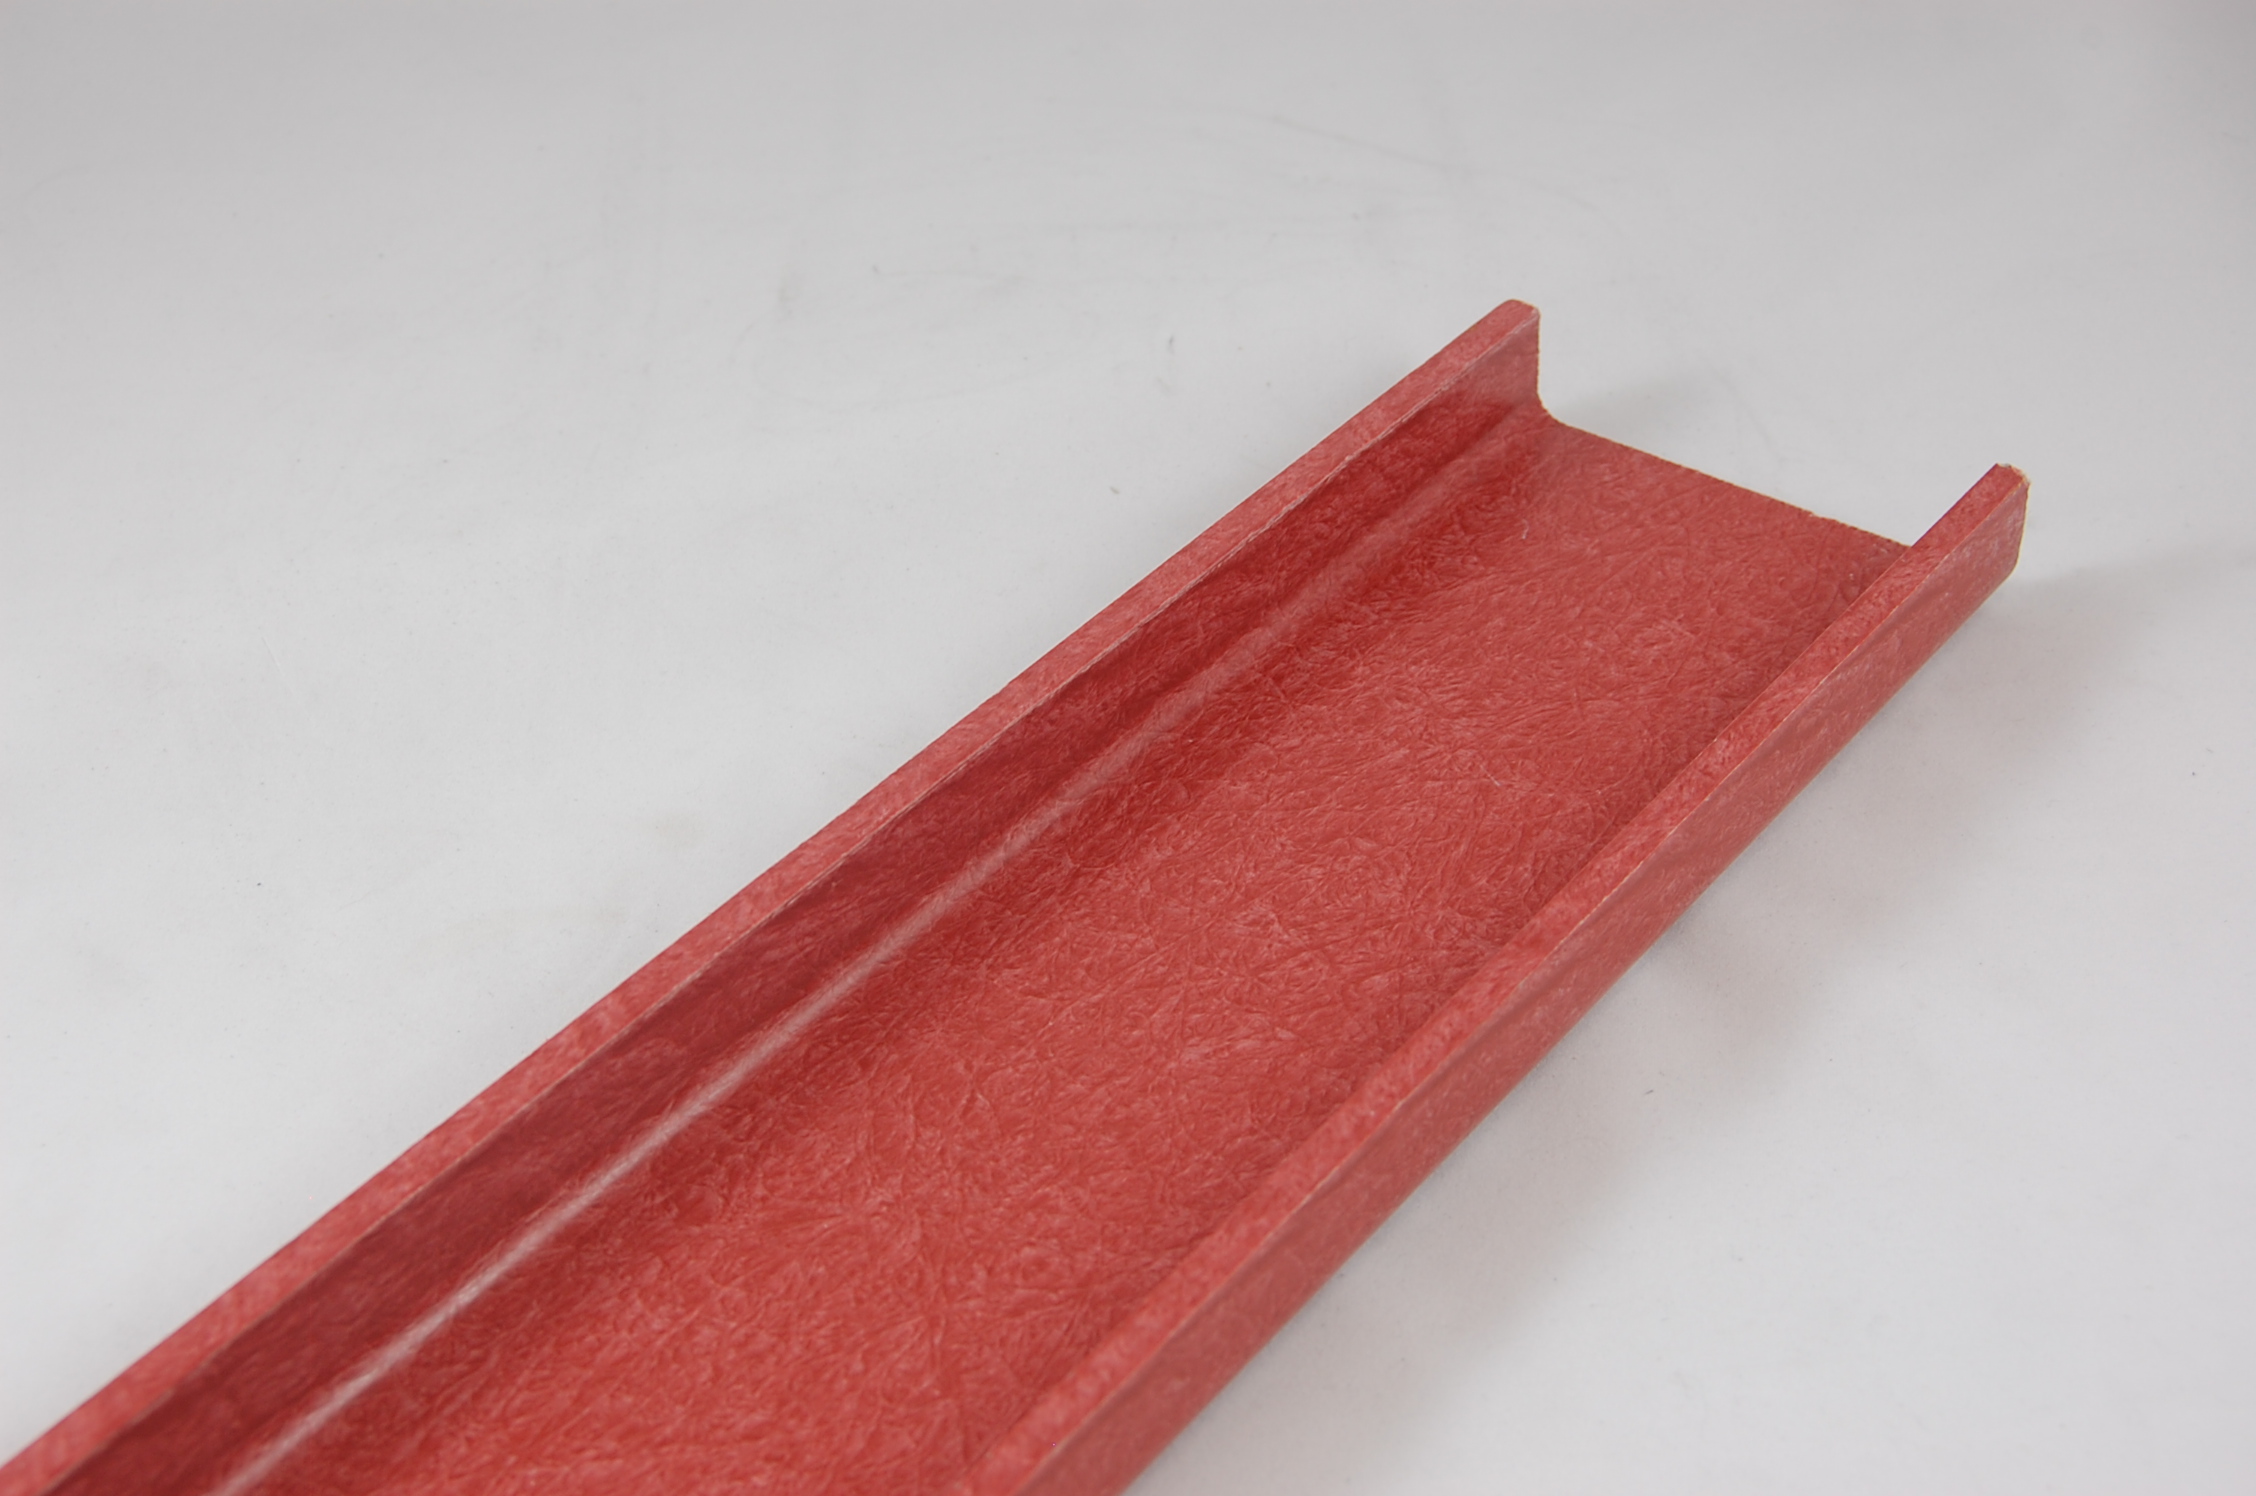 4"W x 1 1/8" Leg x 1/4" thick GLASROD® Grade 1130 Fiberglass-Reinforced Polyester Laminate Channel, red,  120"L channel